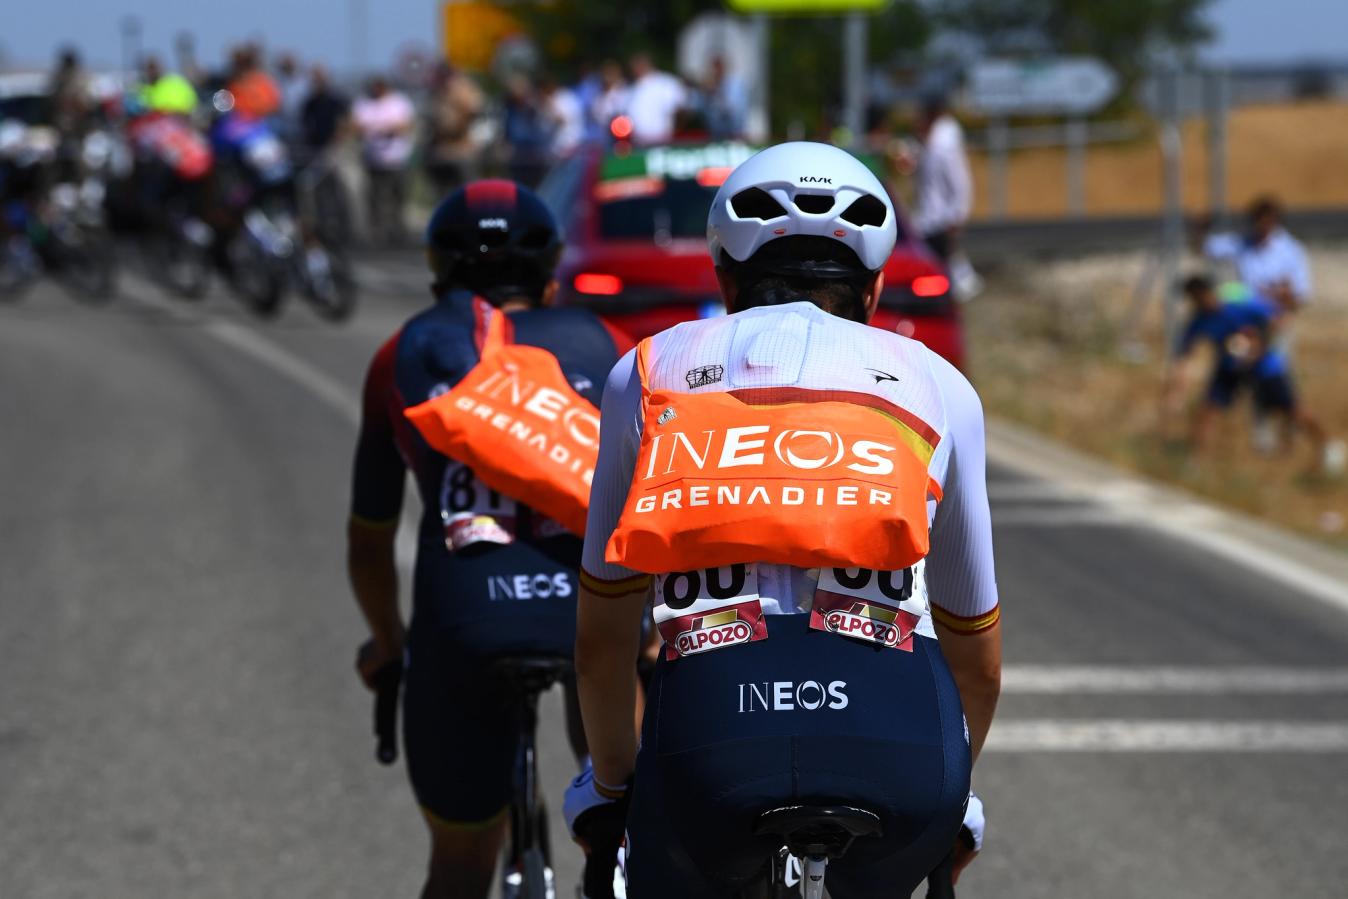 As a nutritional partner for the team, Science in Sport will have been used practically every day by Ineos riders since 2015